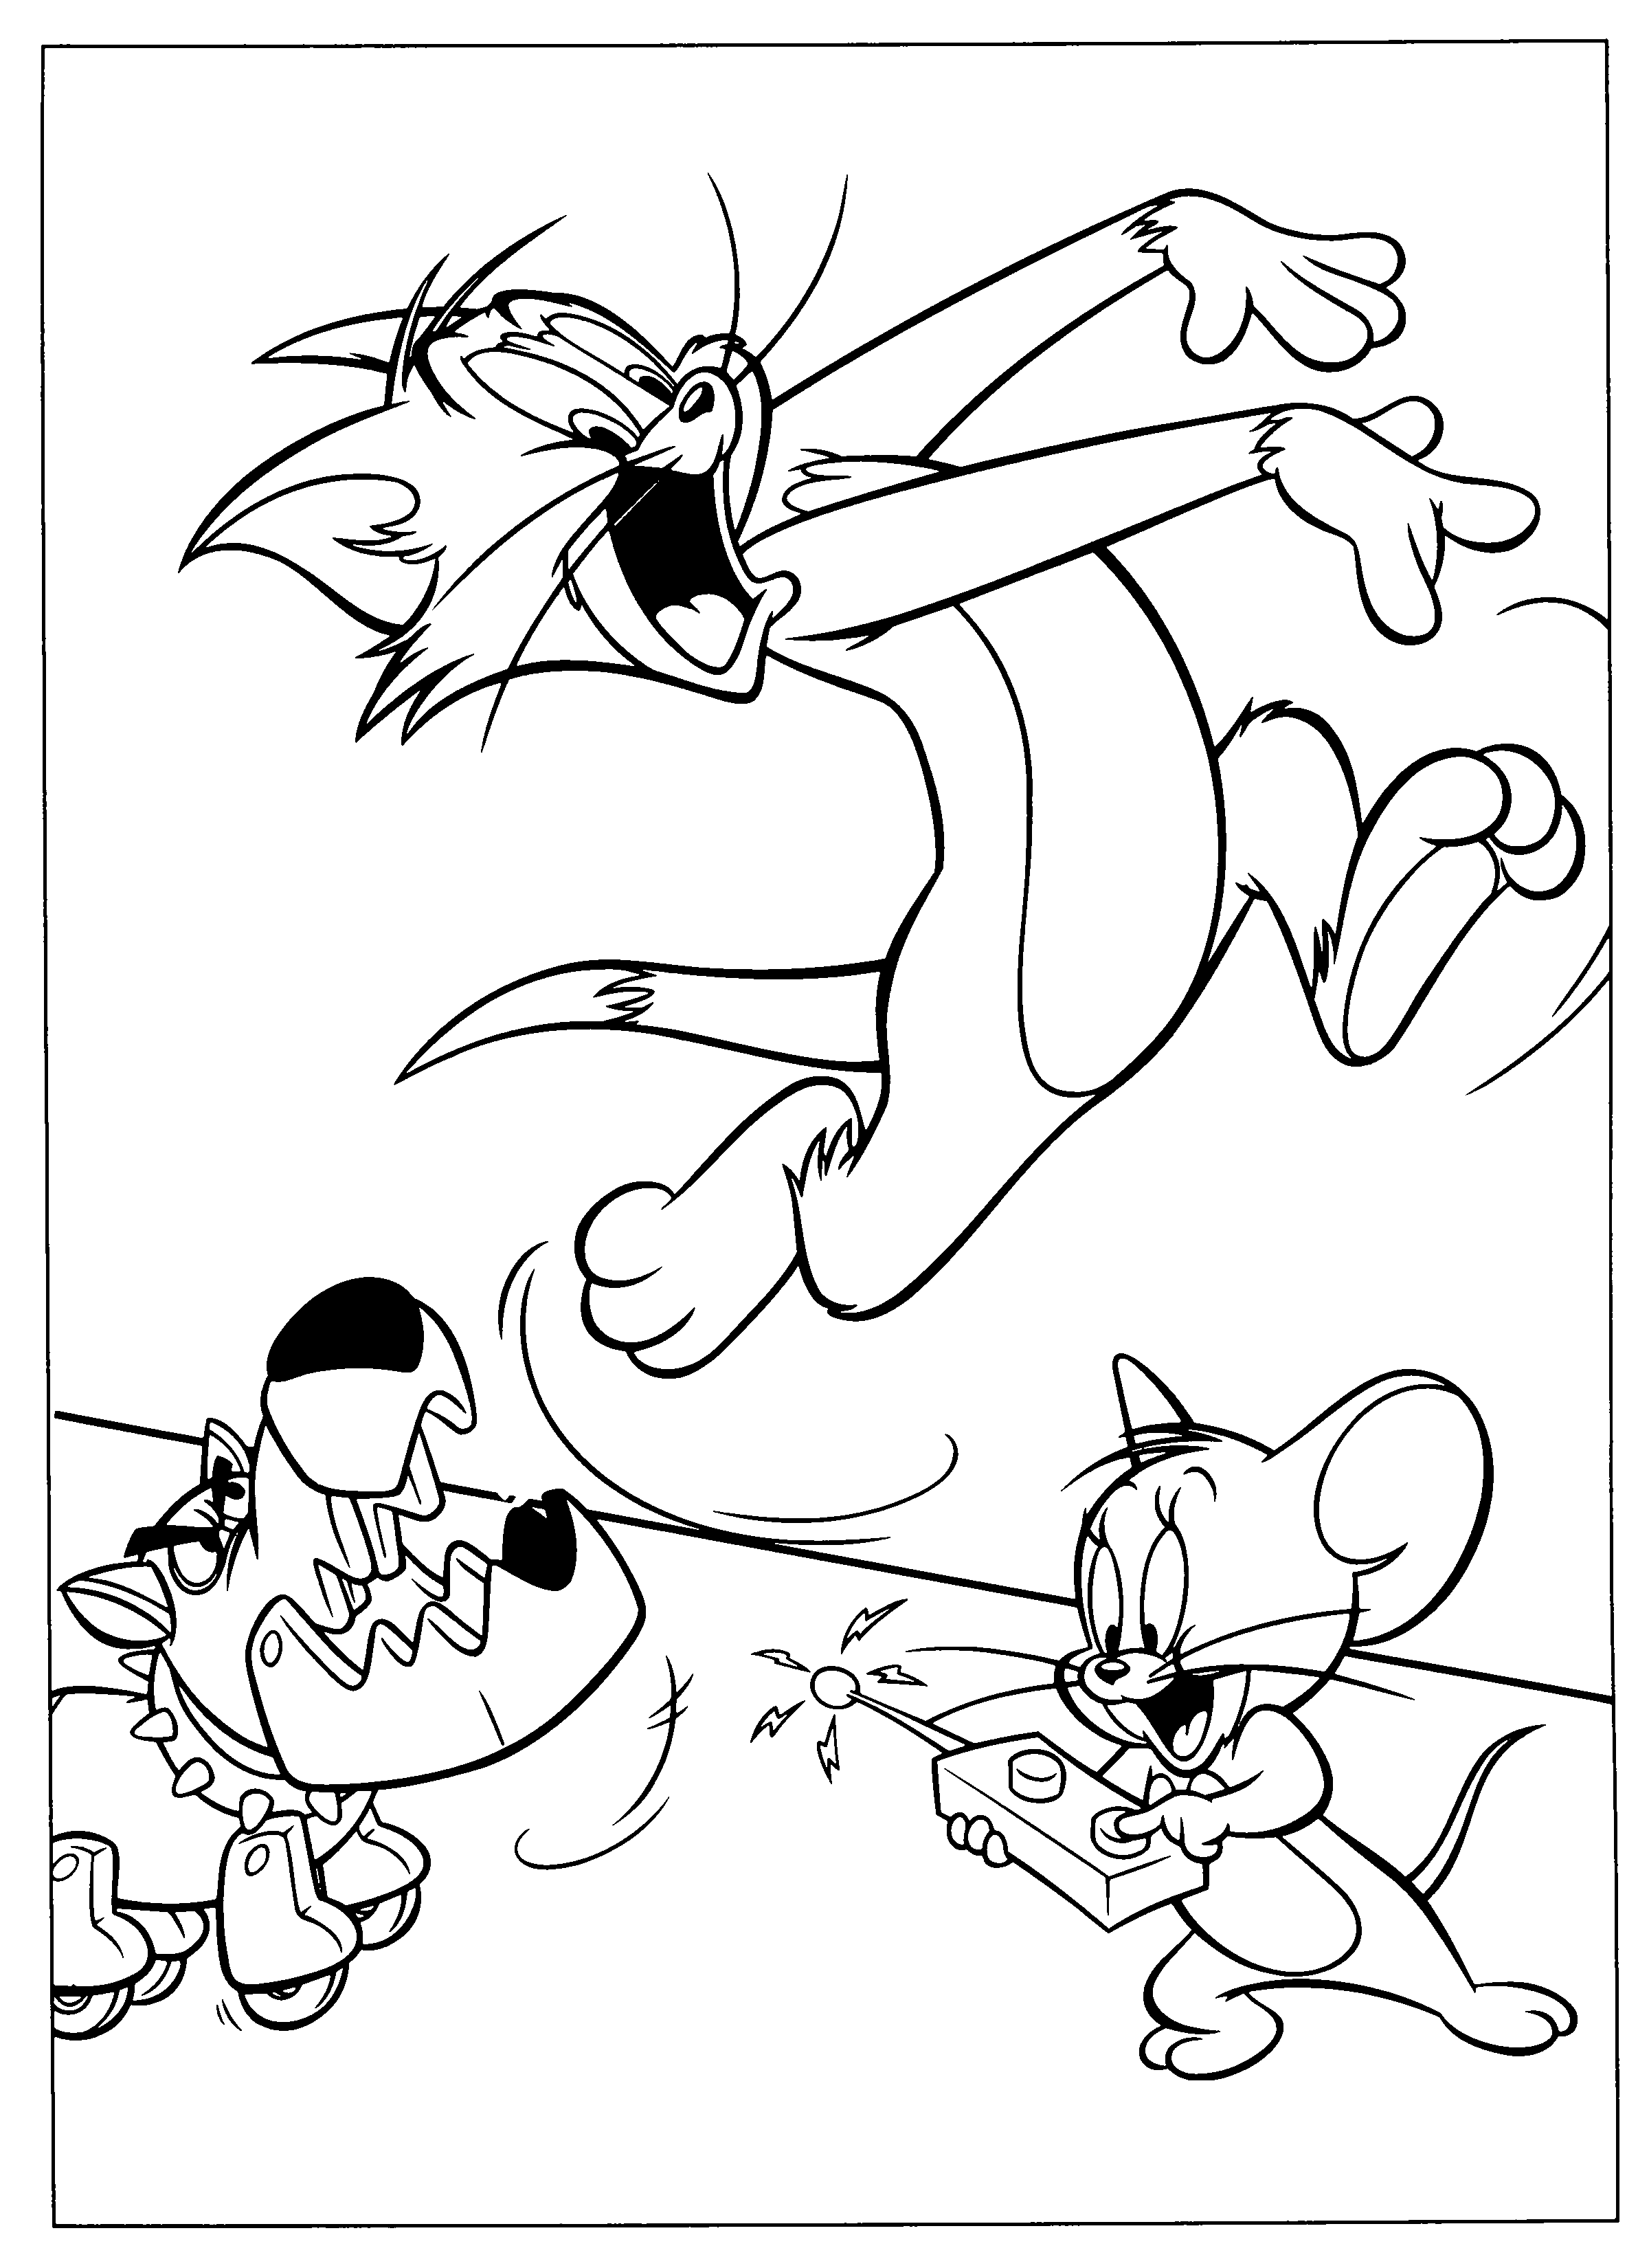 tom and jerry coloring pages online tom and jerry coloring pages free printables happy kids tom and jerry coloring pages online 